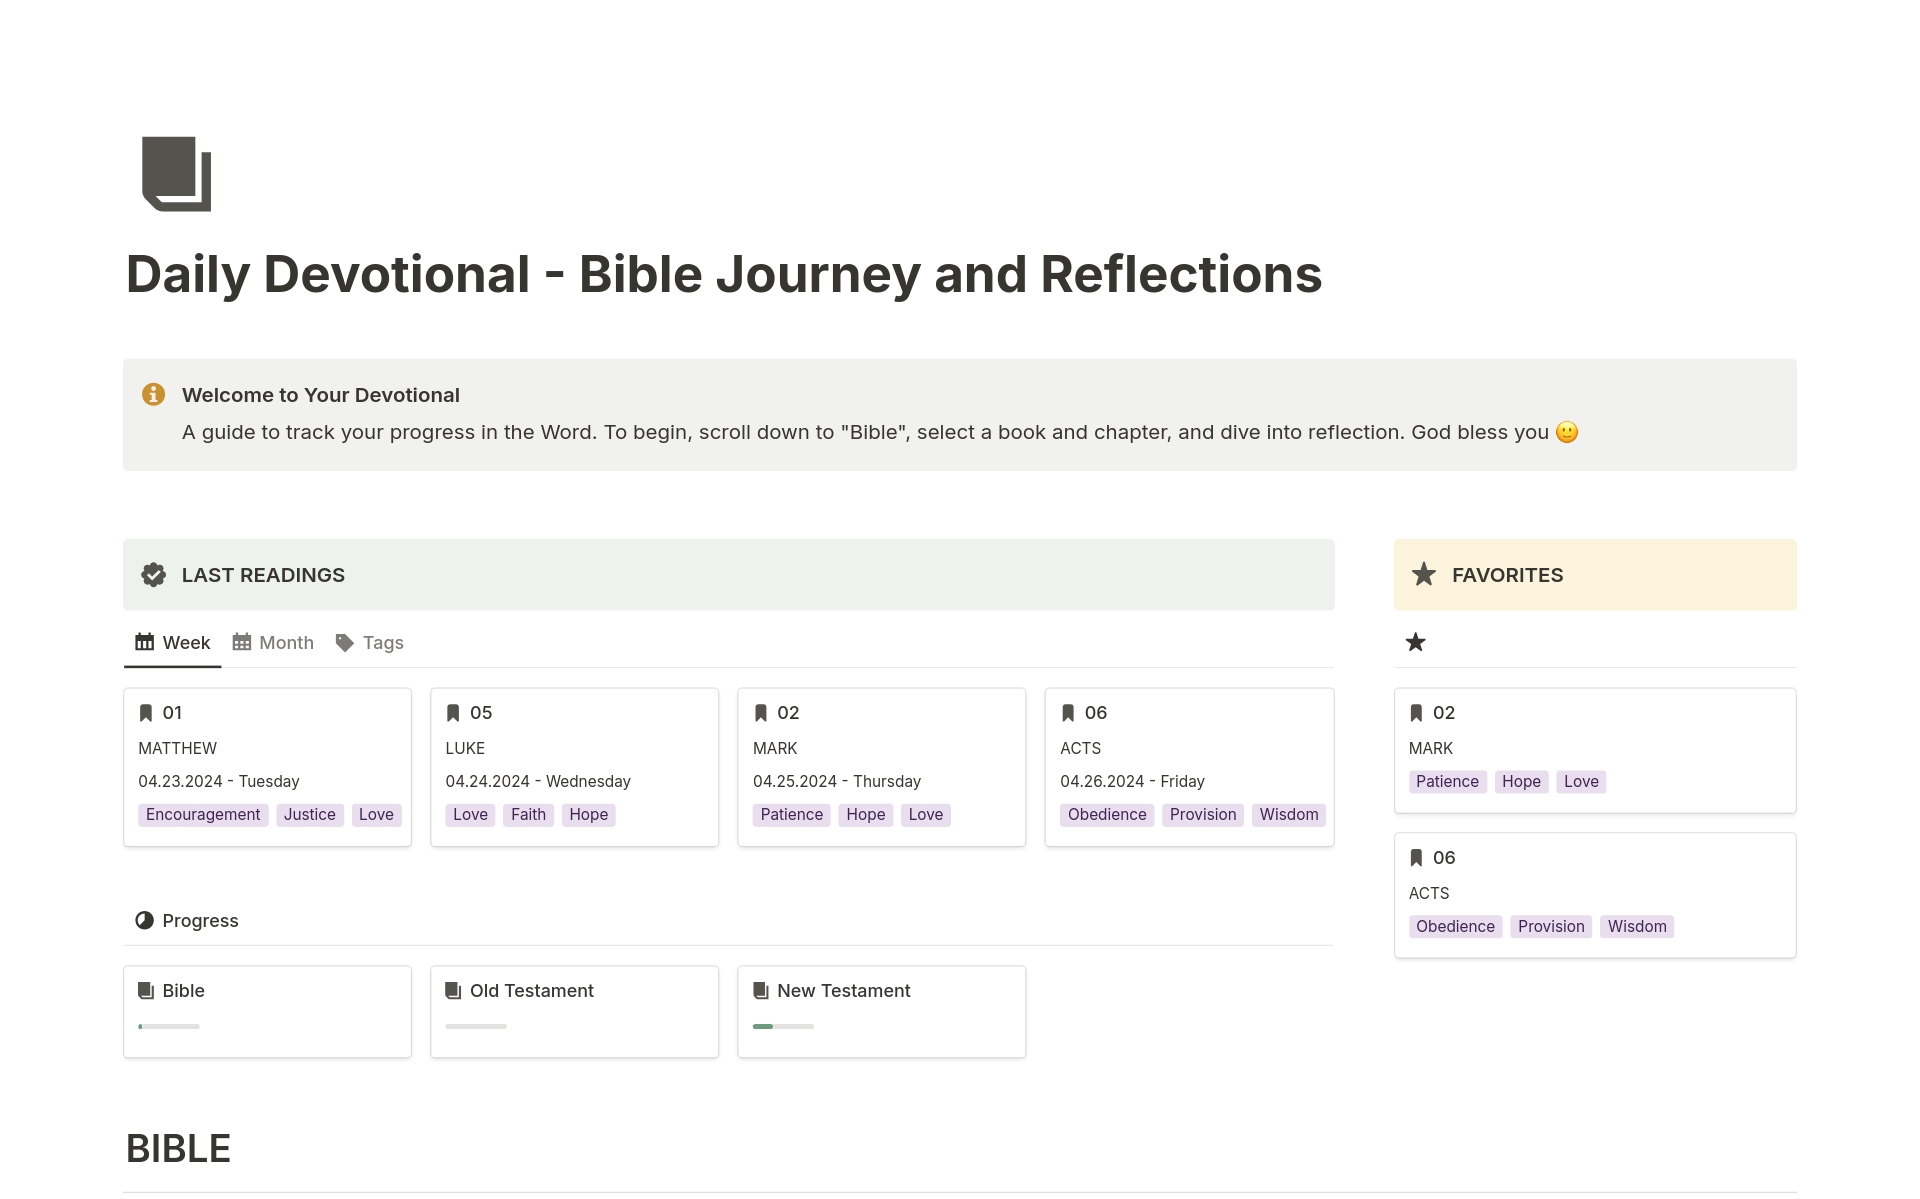 Devotional Diary with a record for biblical reflections, organized by testament, reading tracking, favorites, visual progress identification, and automated logs. Transform your devotional practice into an intimate and organized journey.